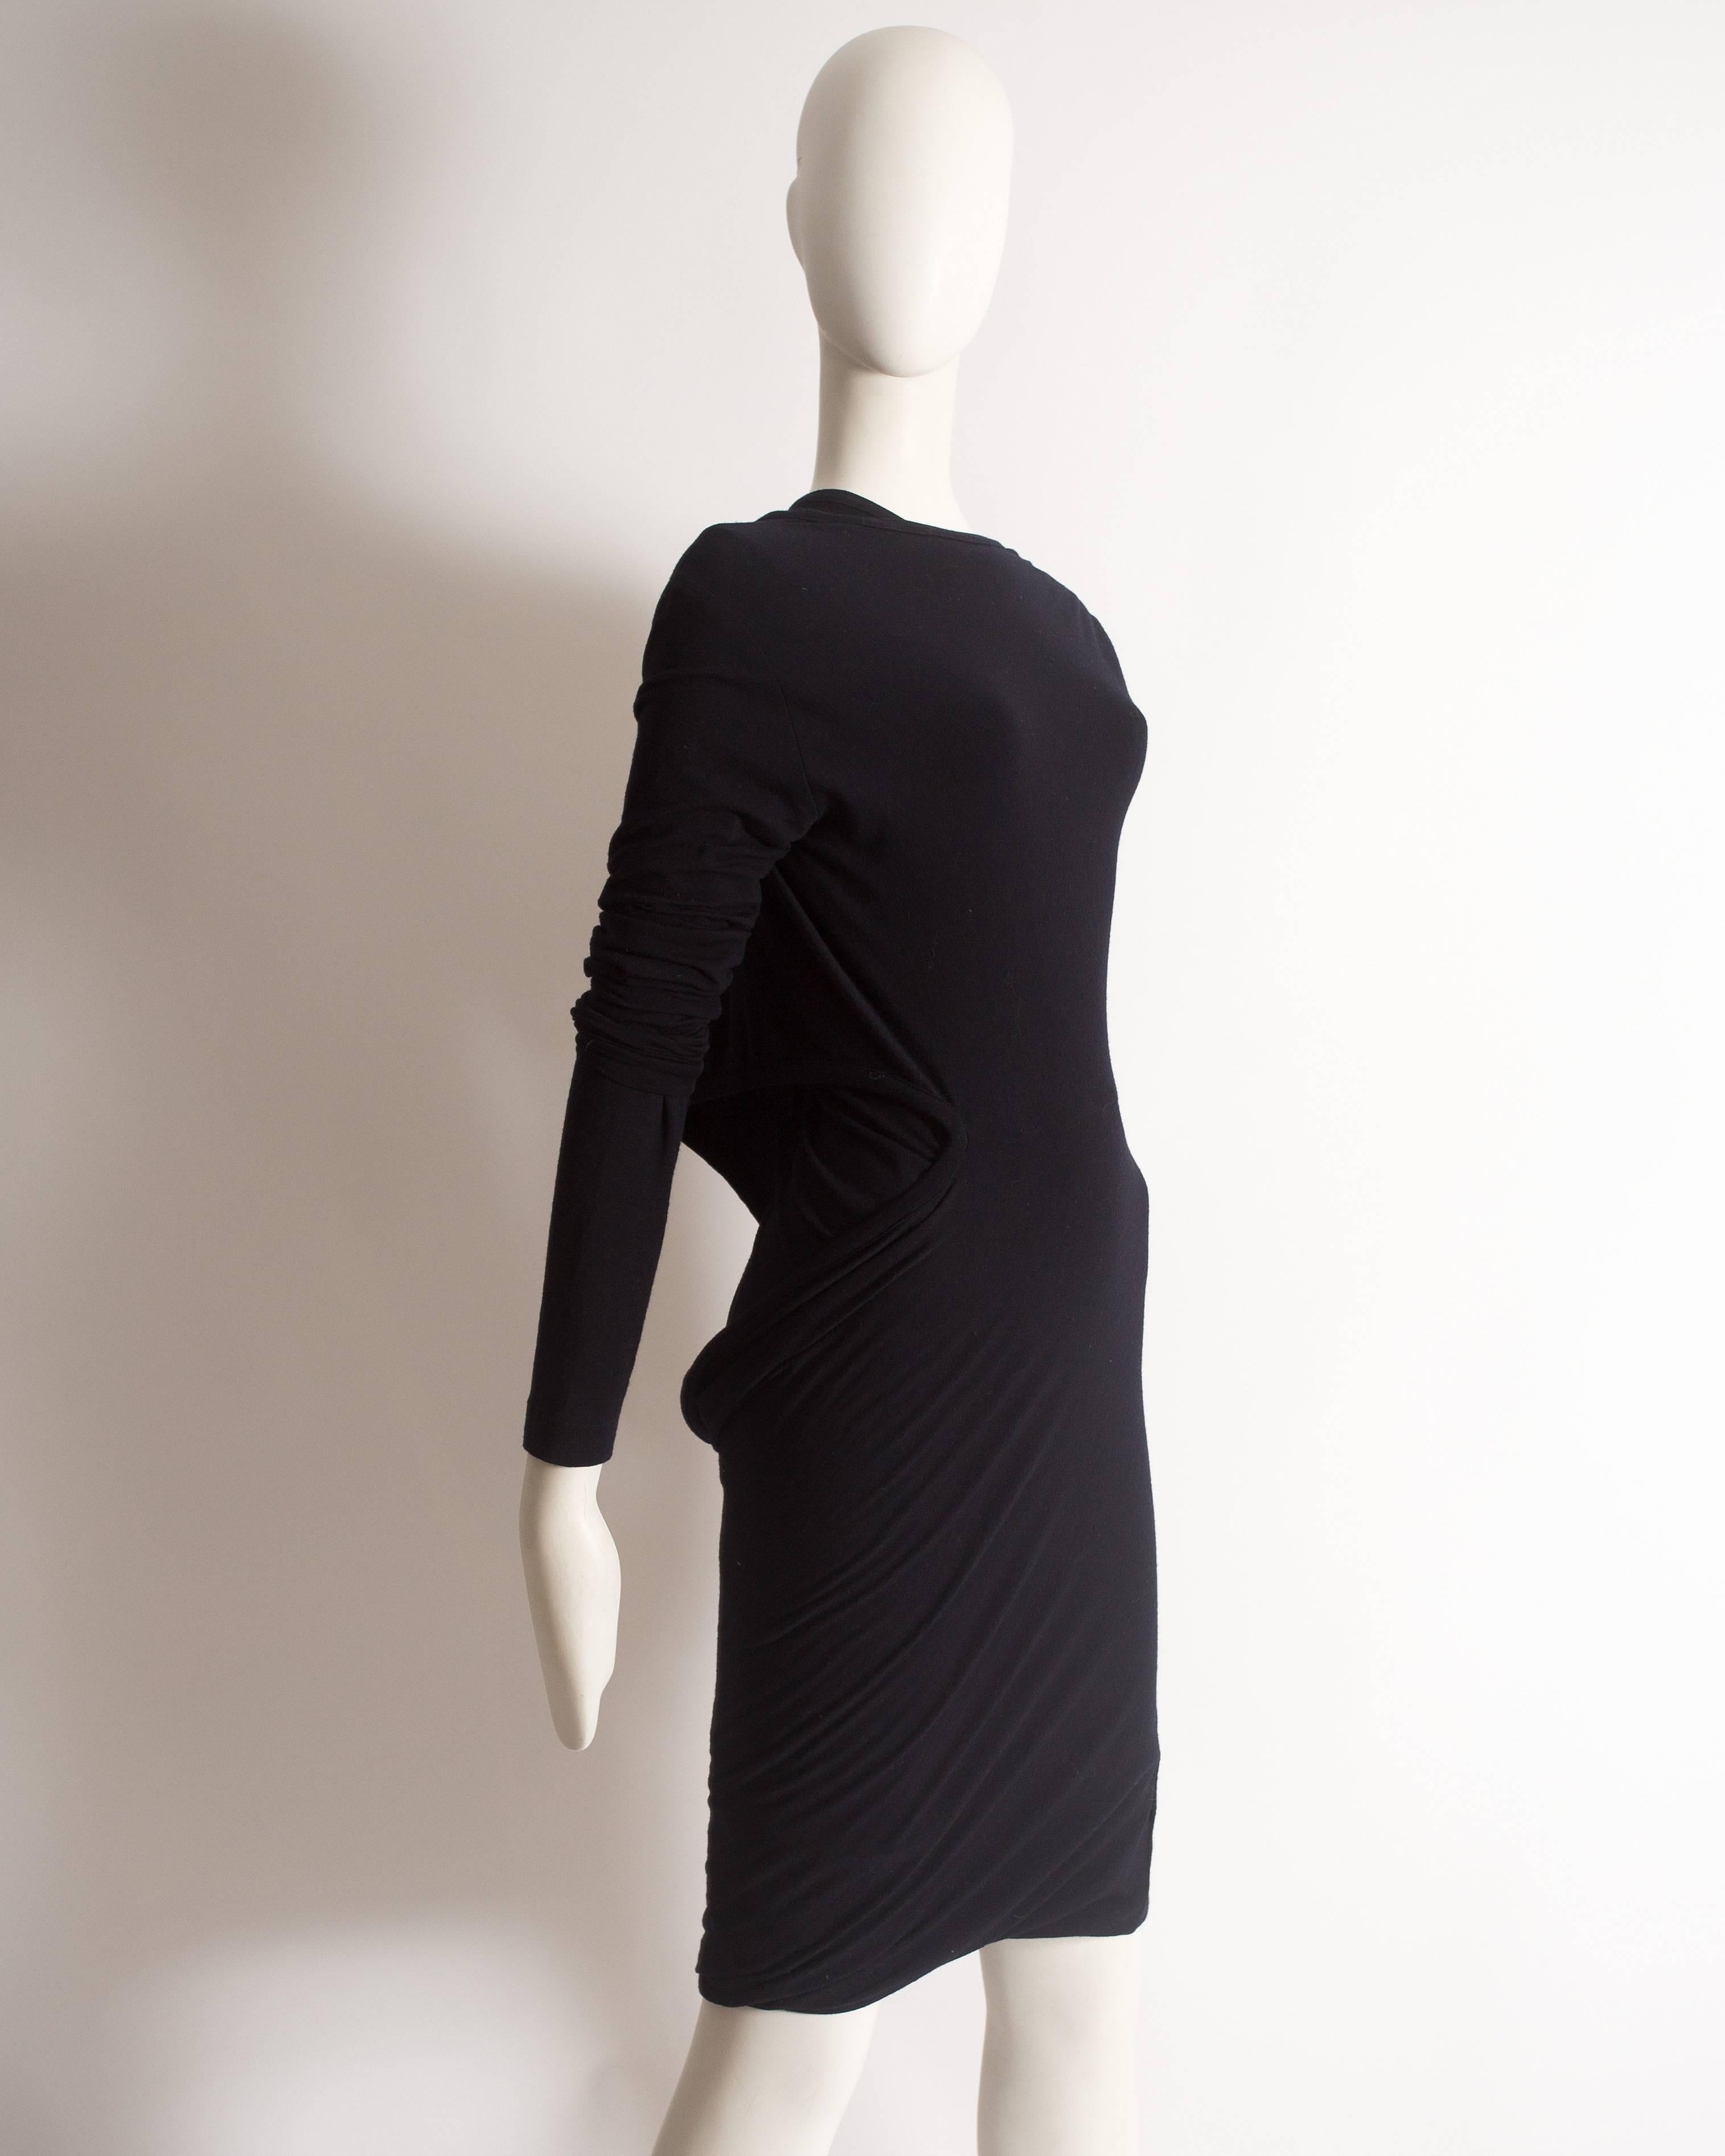 Comme des Garcons 'Punk Chic' black knitted dress, circa 1991 1